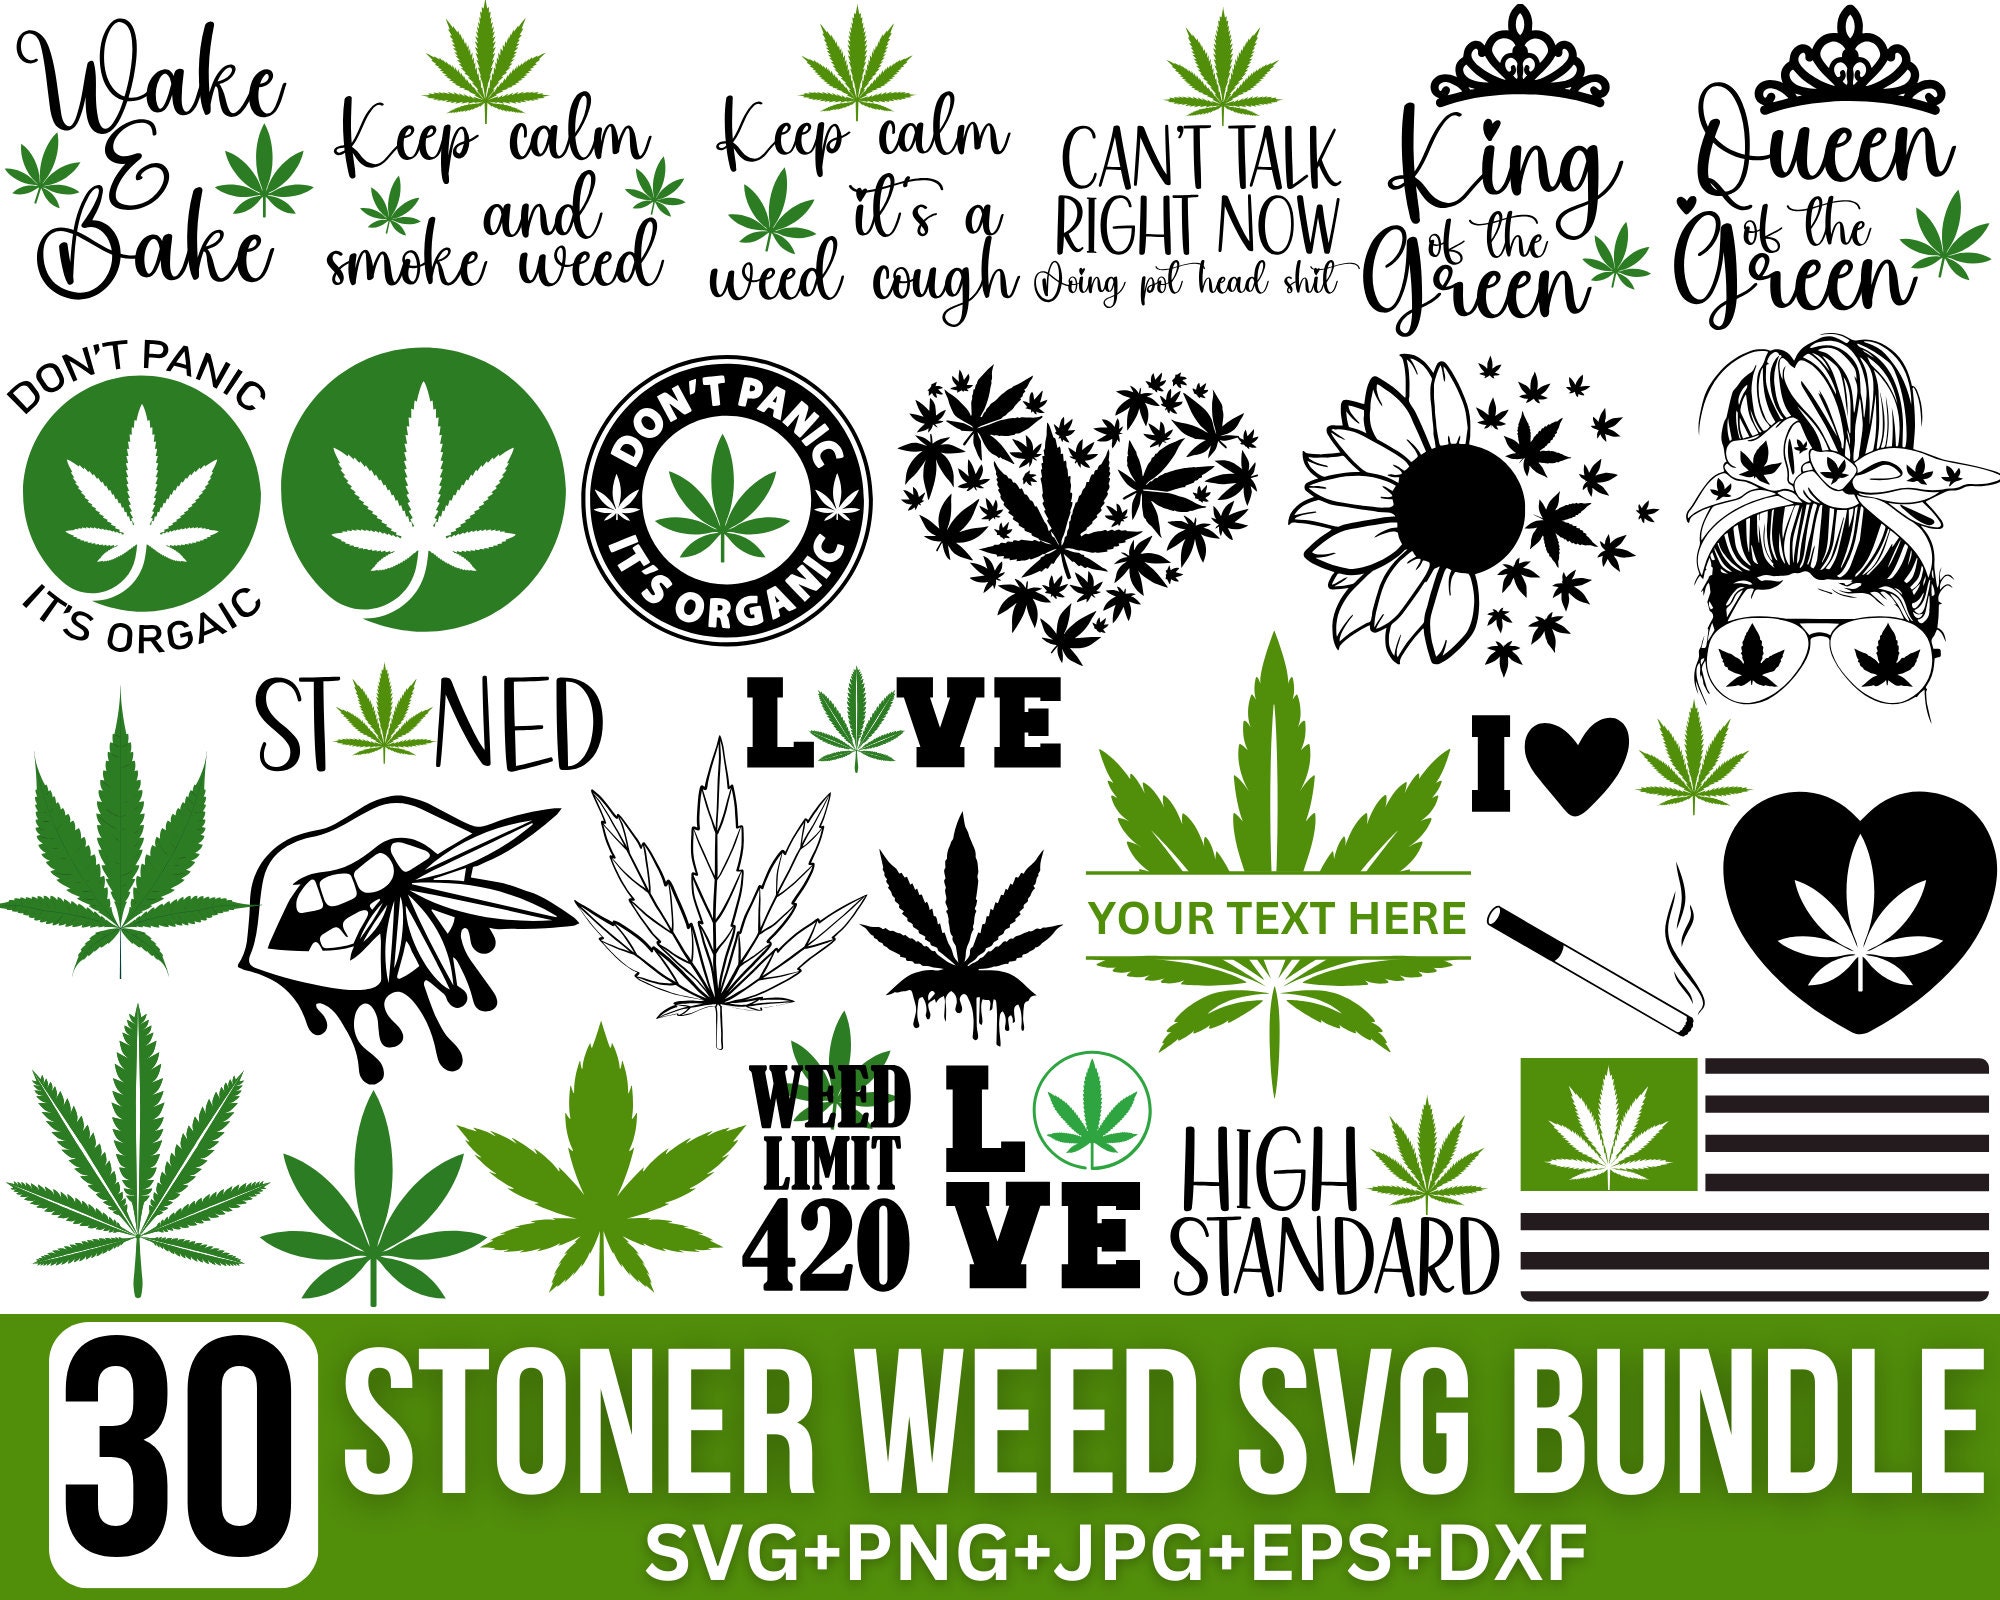 1,264 Weed Tray Images, Stock Photos, 3D objects, & Vectors